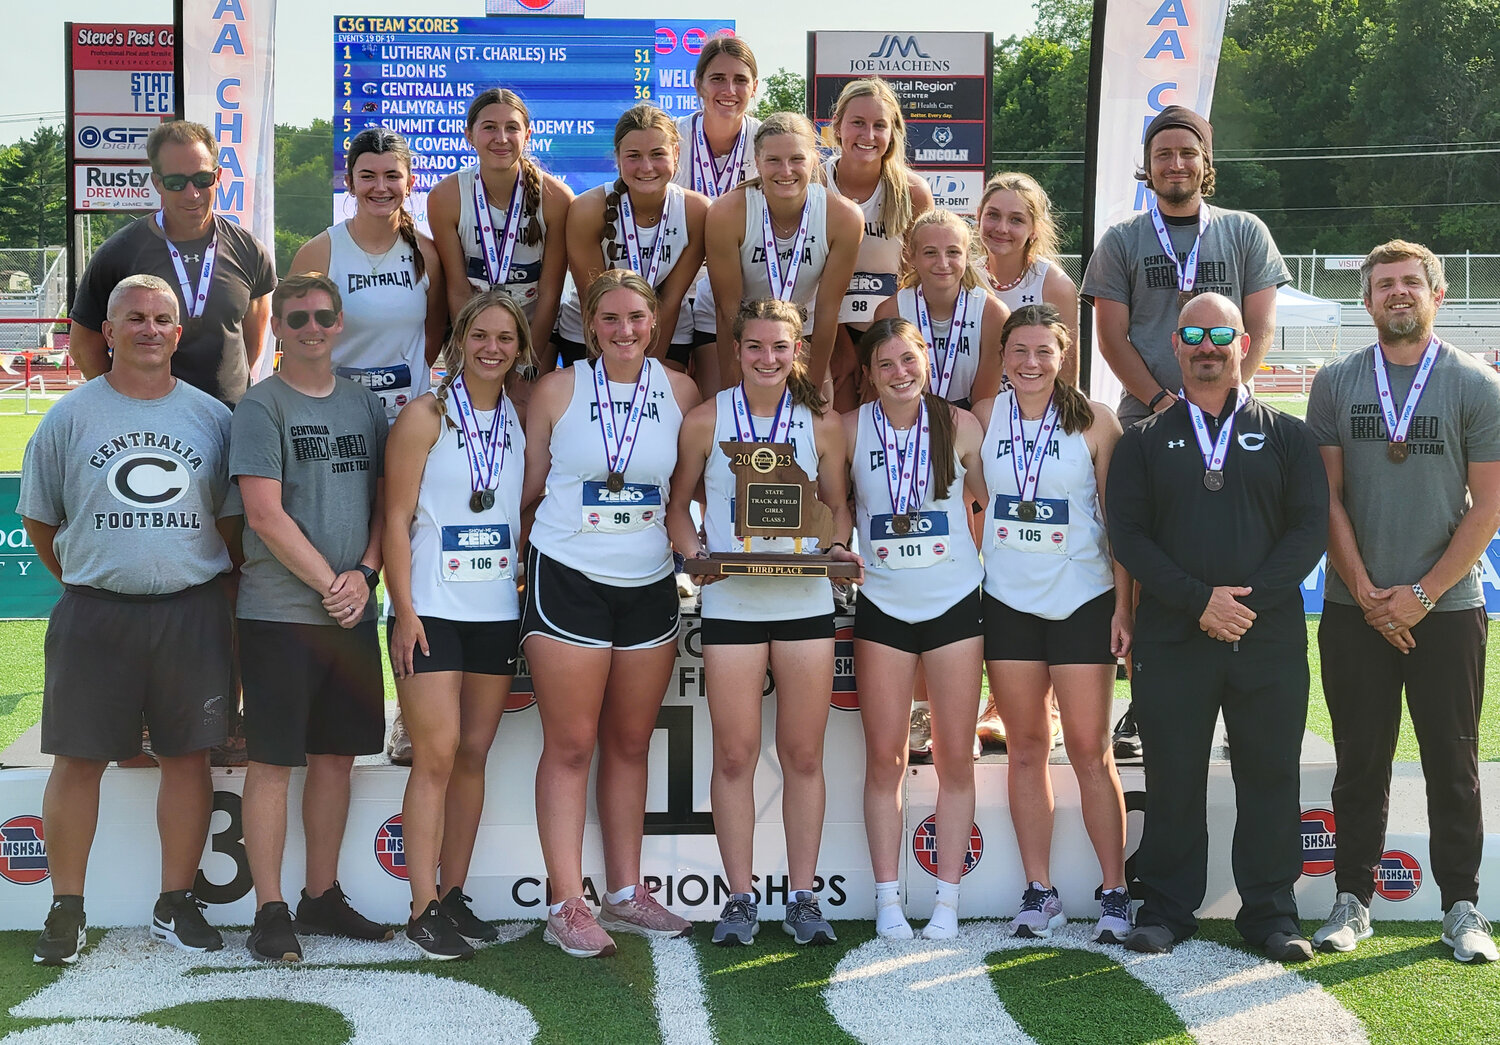 The Centralia girls track and field team won its first state plaque since 1985 and second ever award by finishing third on Saturday in the Class 3 state track and field meet at Adkins Stadium in Jefferson City.